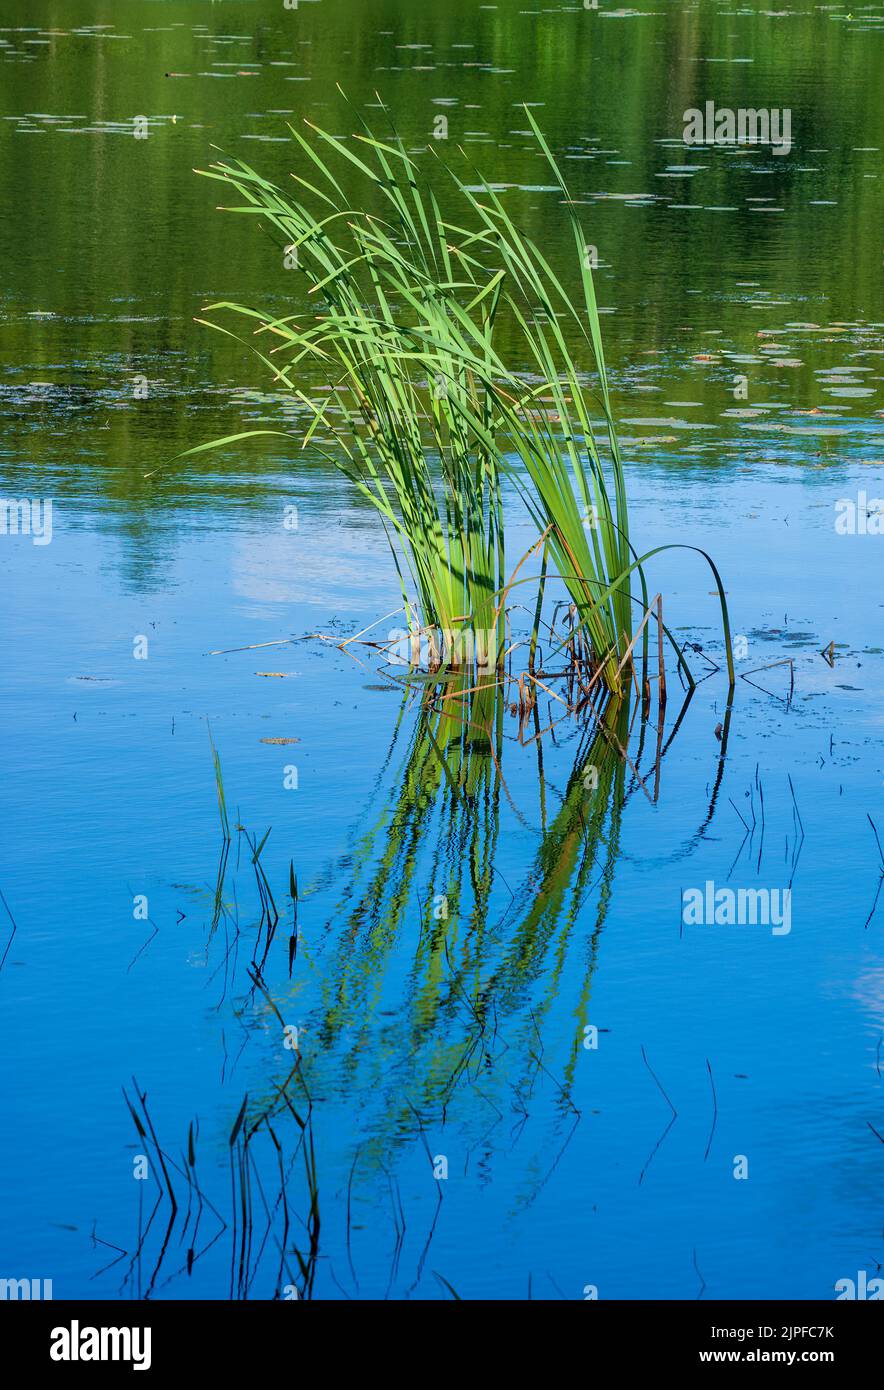 Tuft of green reeds on a lake. Leaf blades reflected on the water surface. Eames Pons, Moore State Park, Paxton, MA, US. Stock Photo